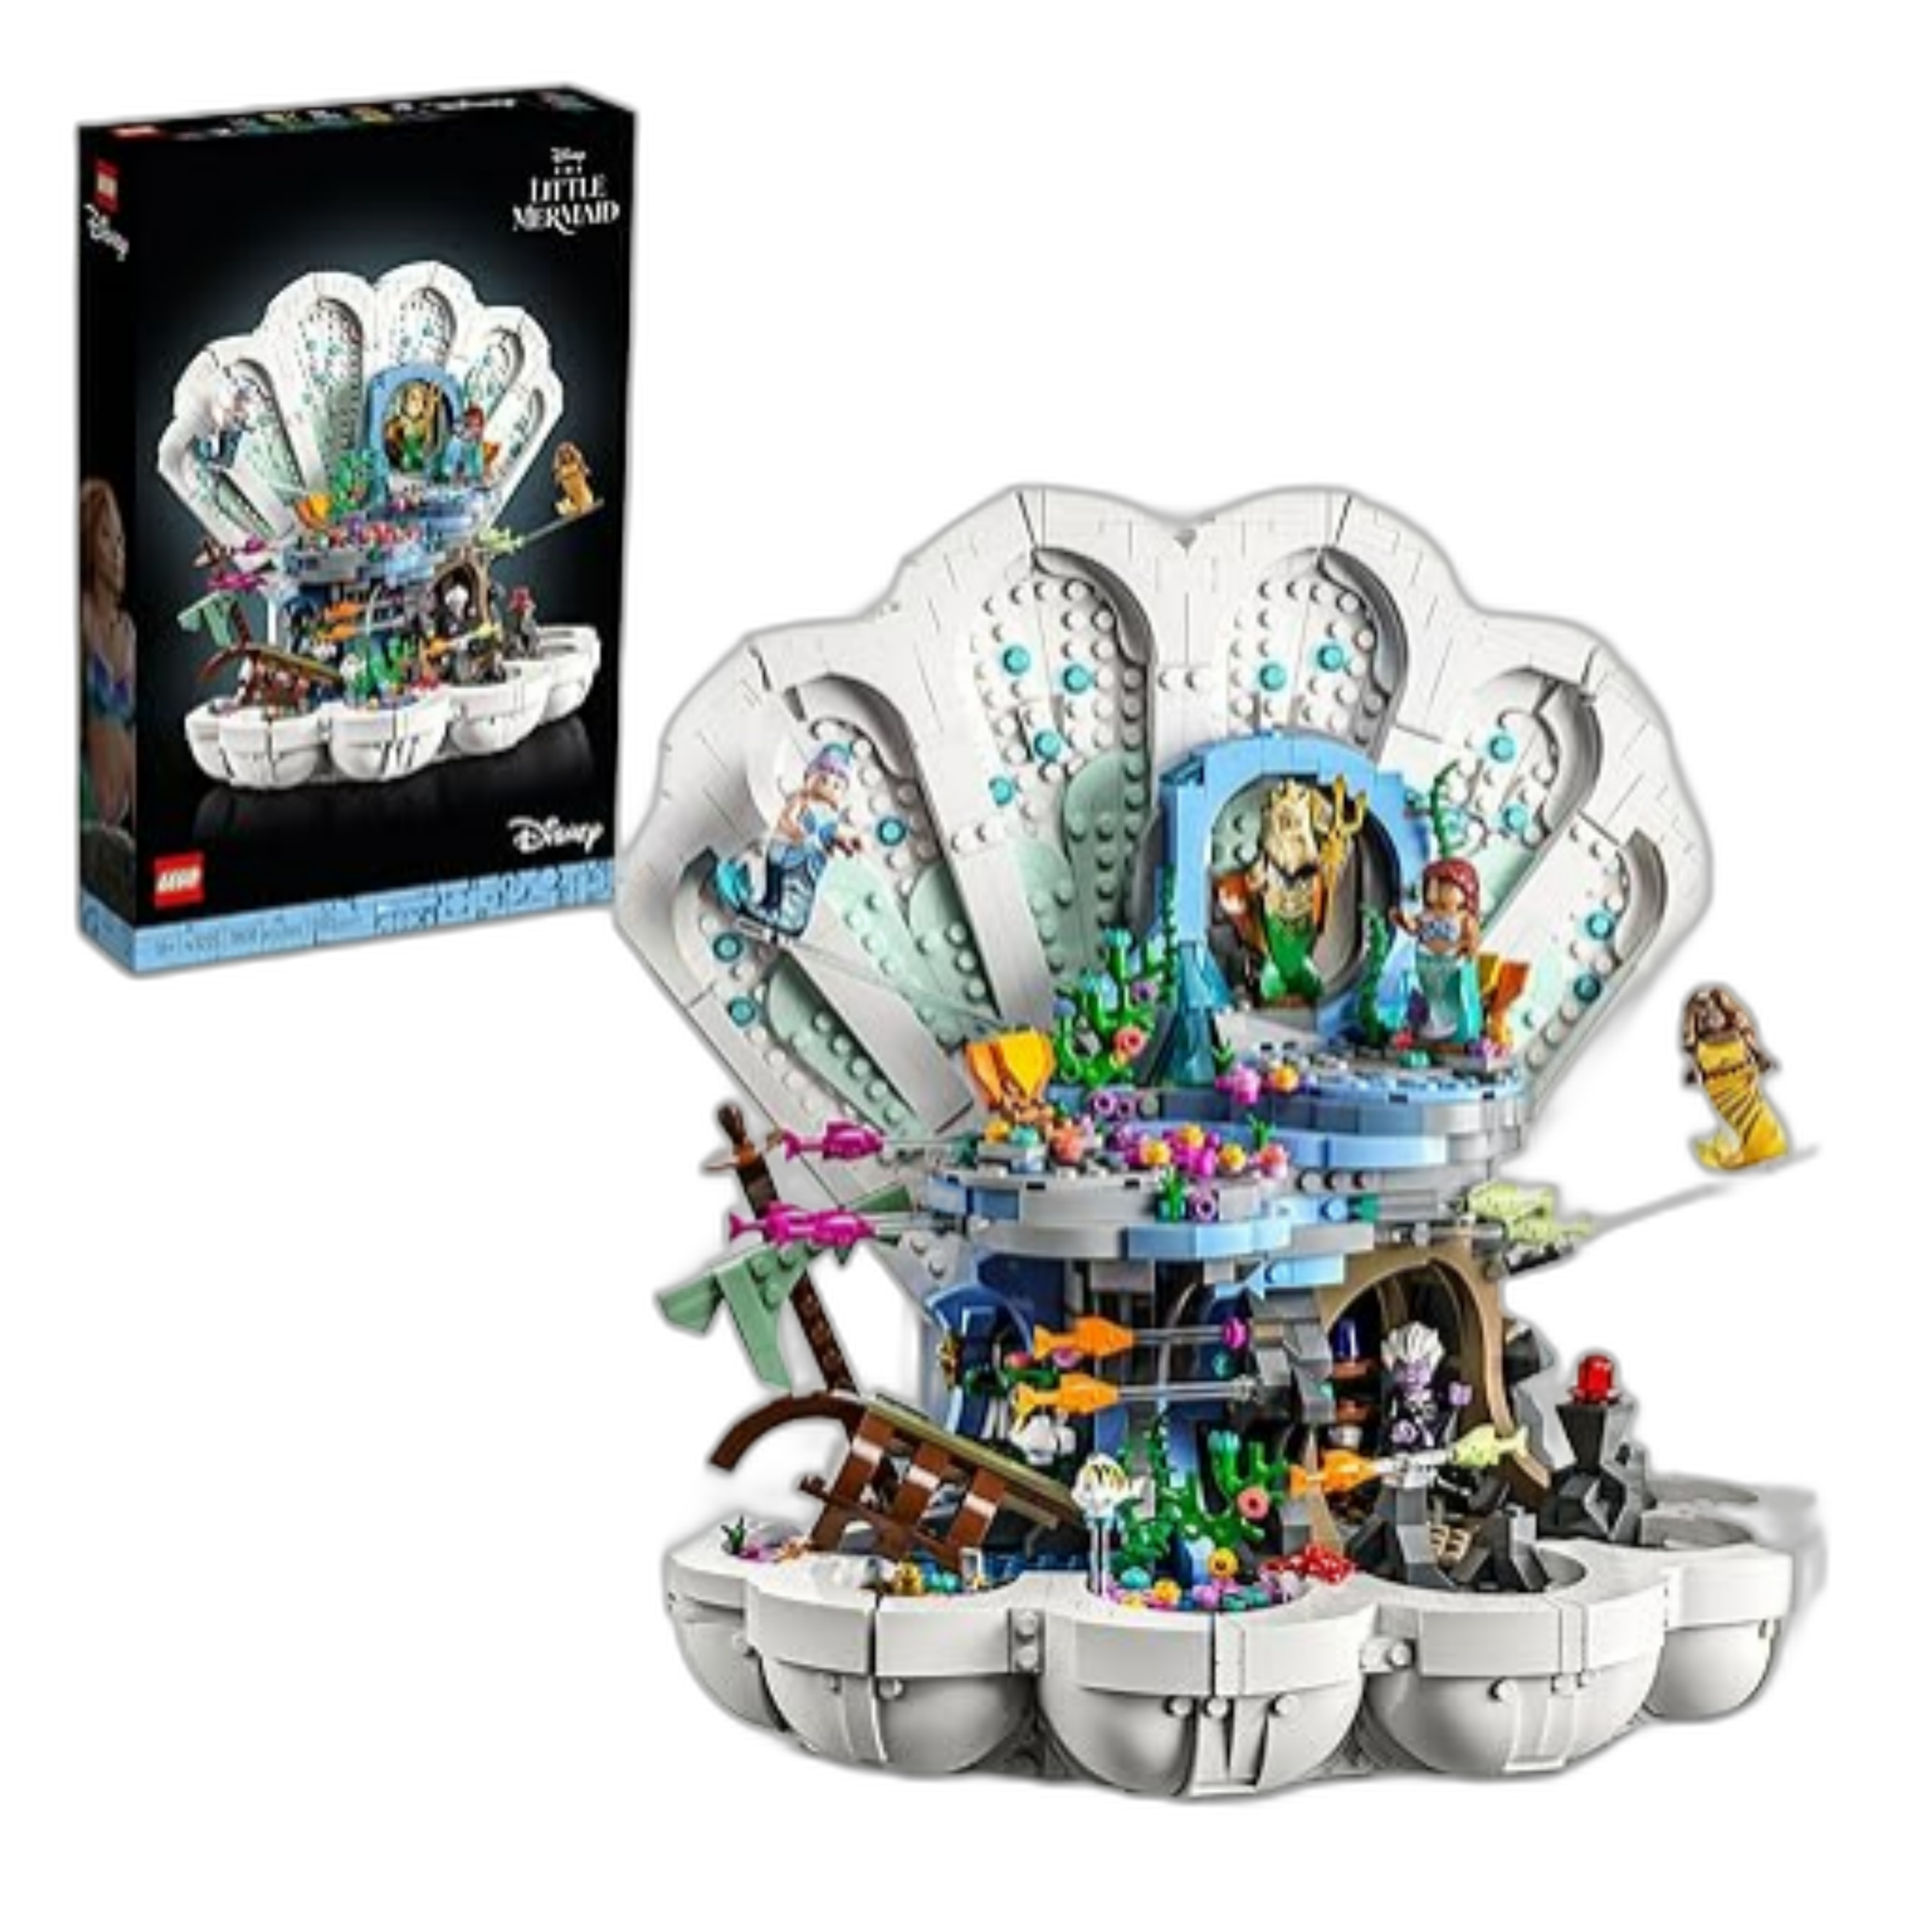 The Little Mermaid Royal Clamshell Lego Set inspired by the live-action movie. 